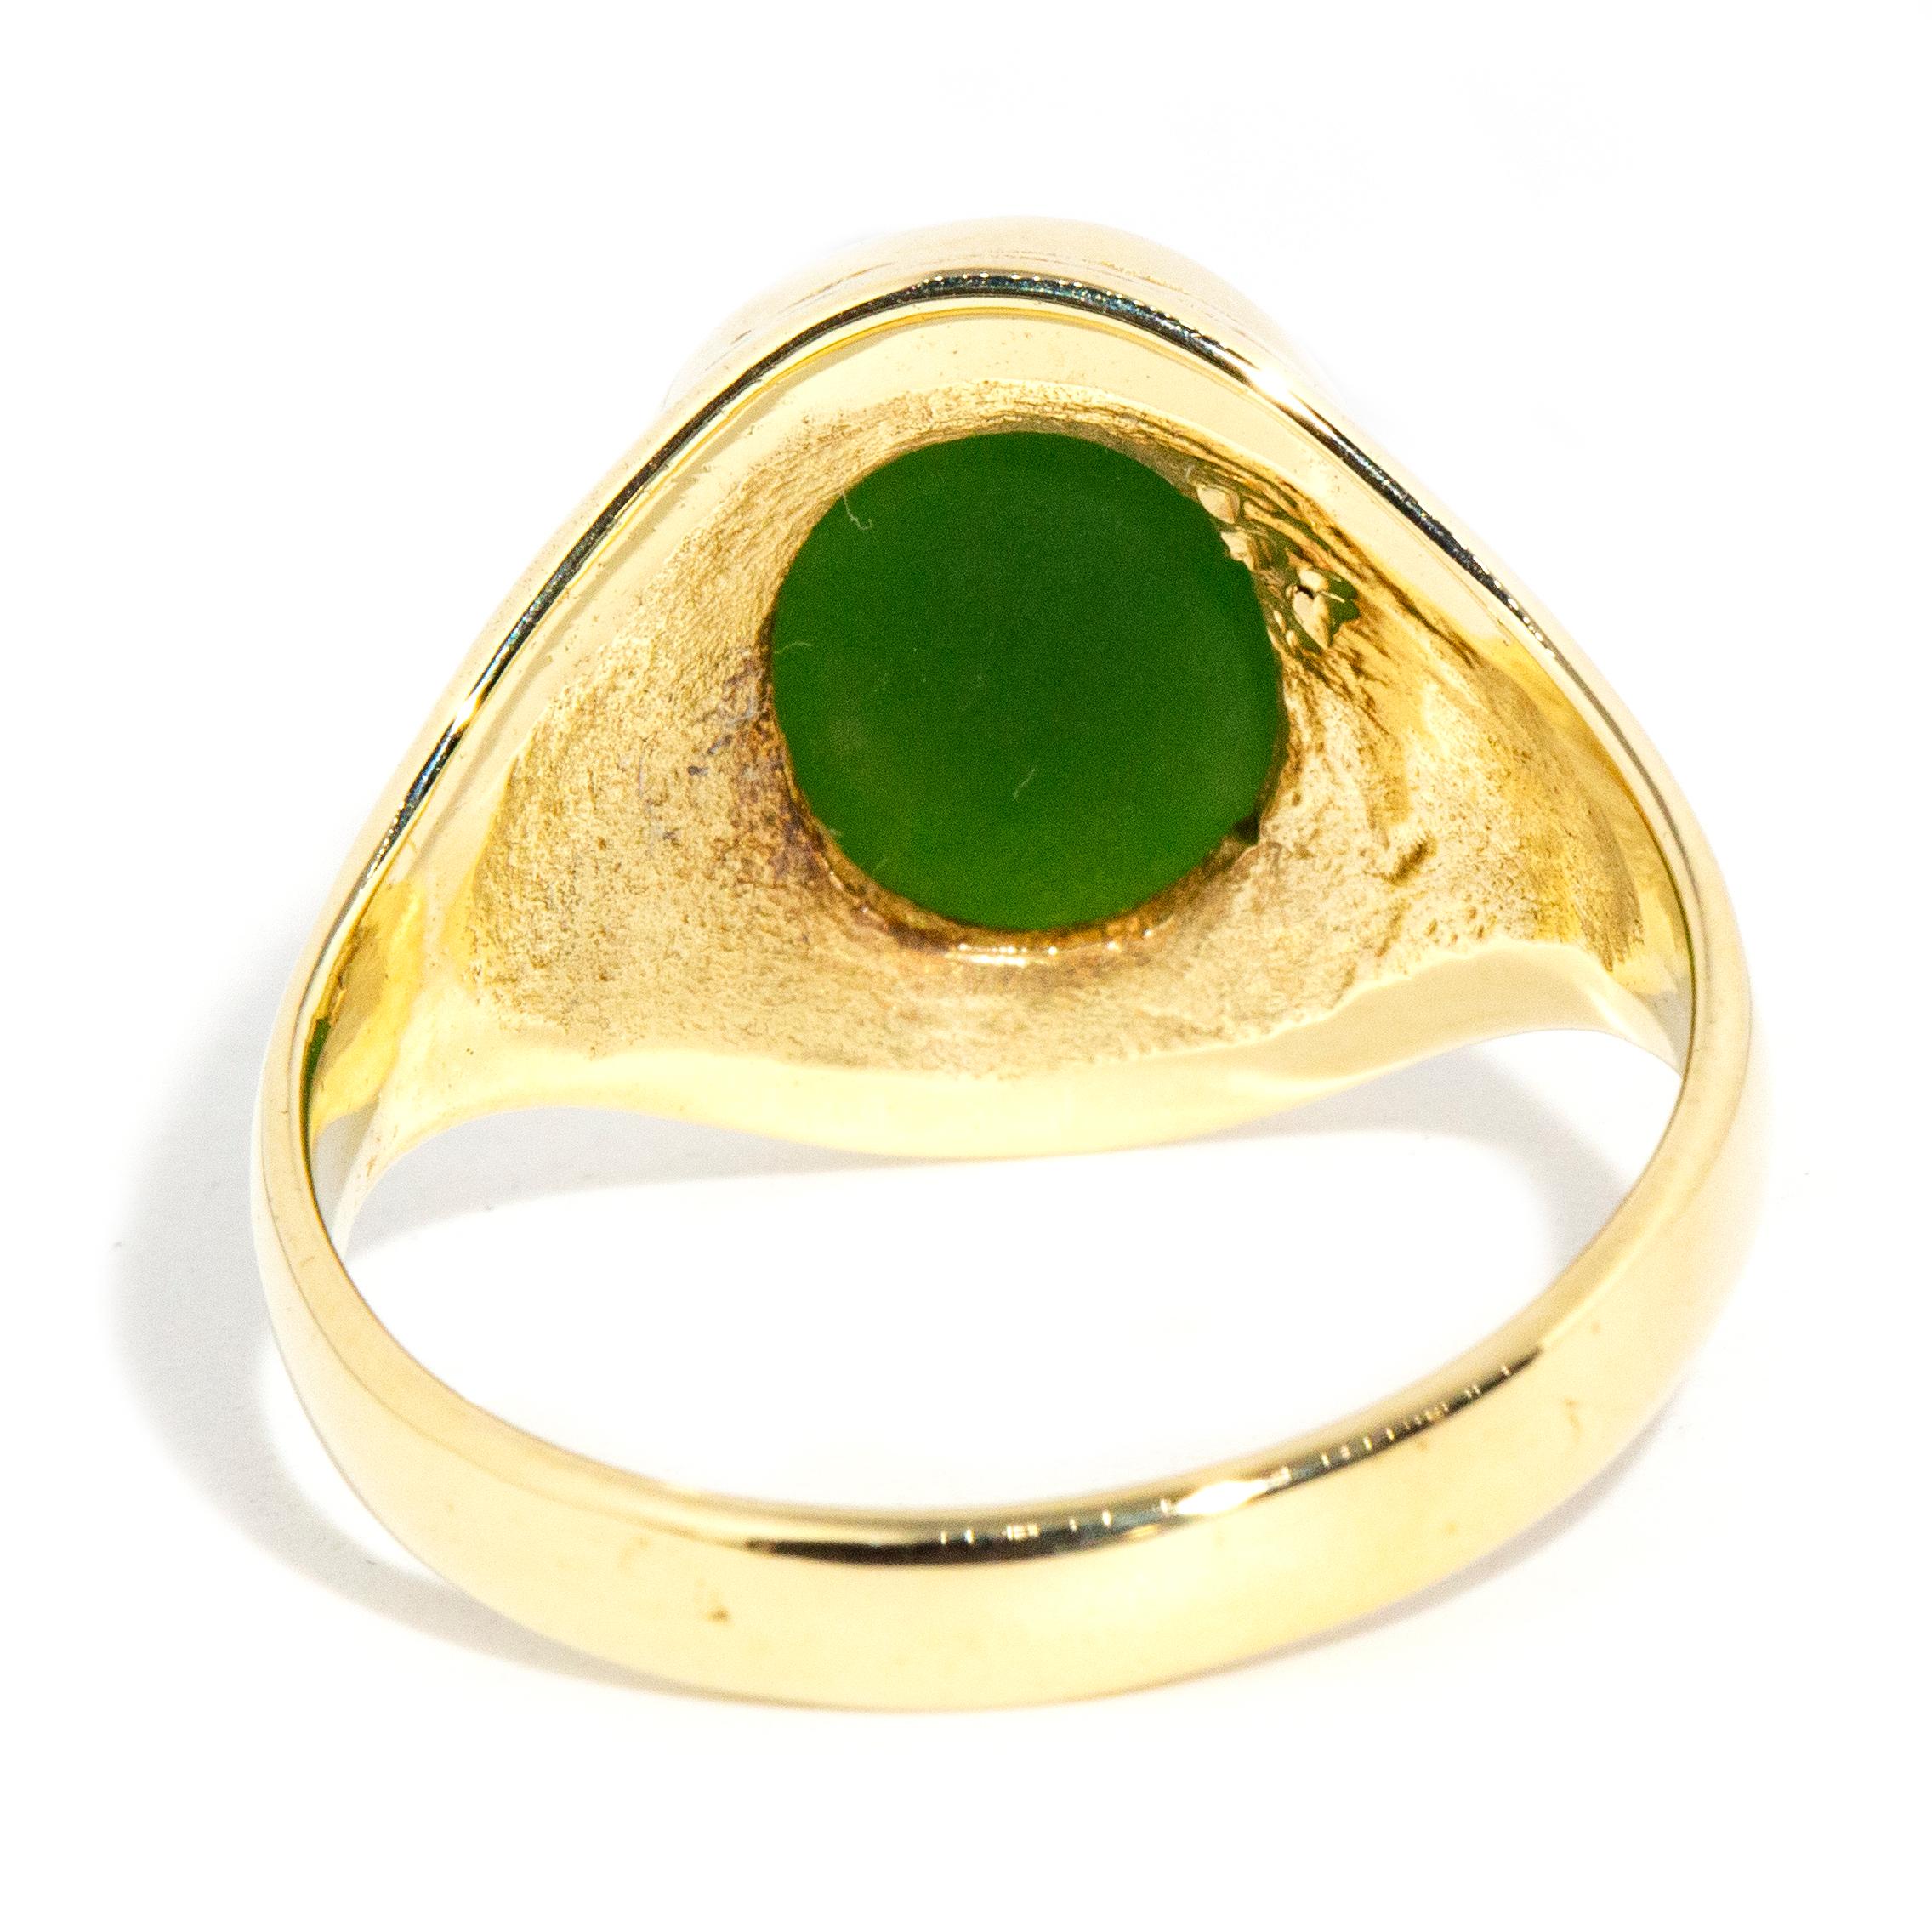 Vintage Circa 1980s Deep Green Nephrite Jade Cabochon Ring 14 Carat Yellow Gold In Good Condition For Sale In Hamilton, AU